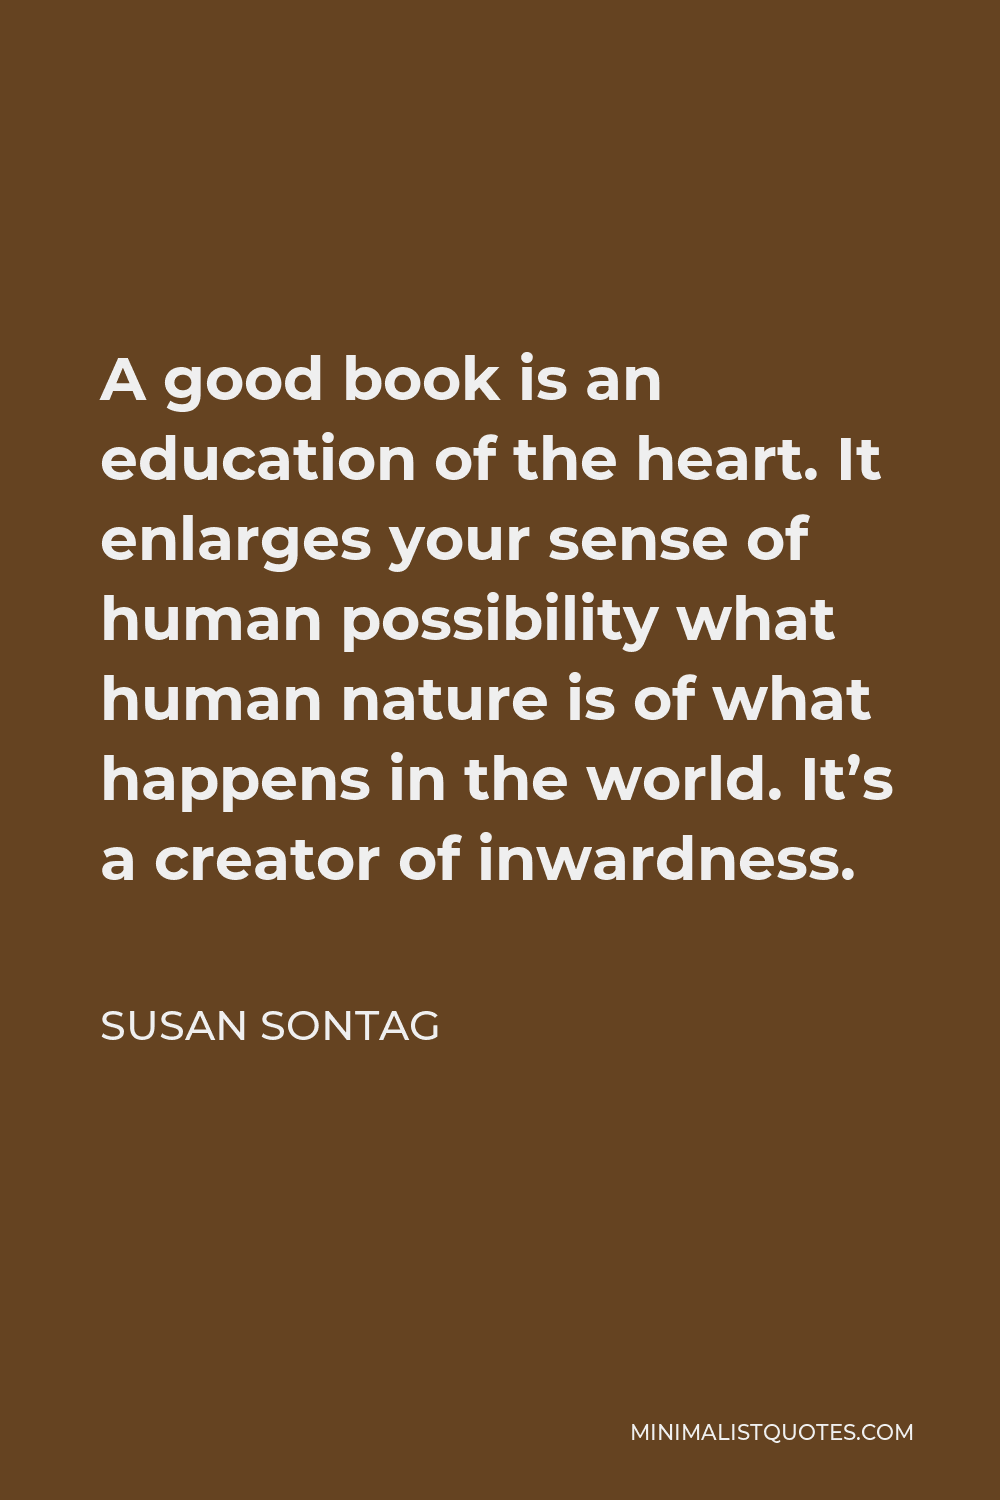 Susan Sontag Quote - A good book is an education of the heart. It enlarges your sense of human possibility what human nature is of what happens in the world. It’s a creator of inwardness.